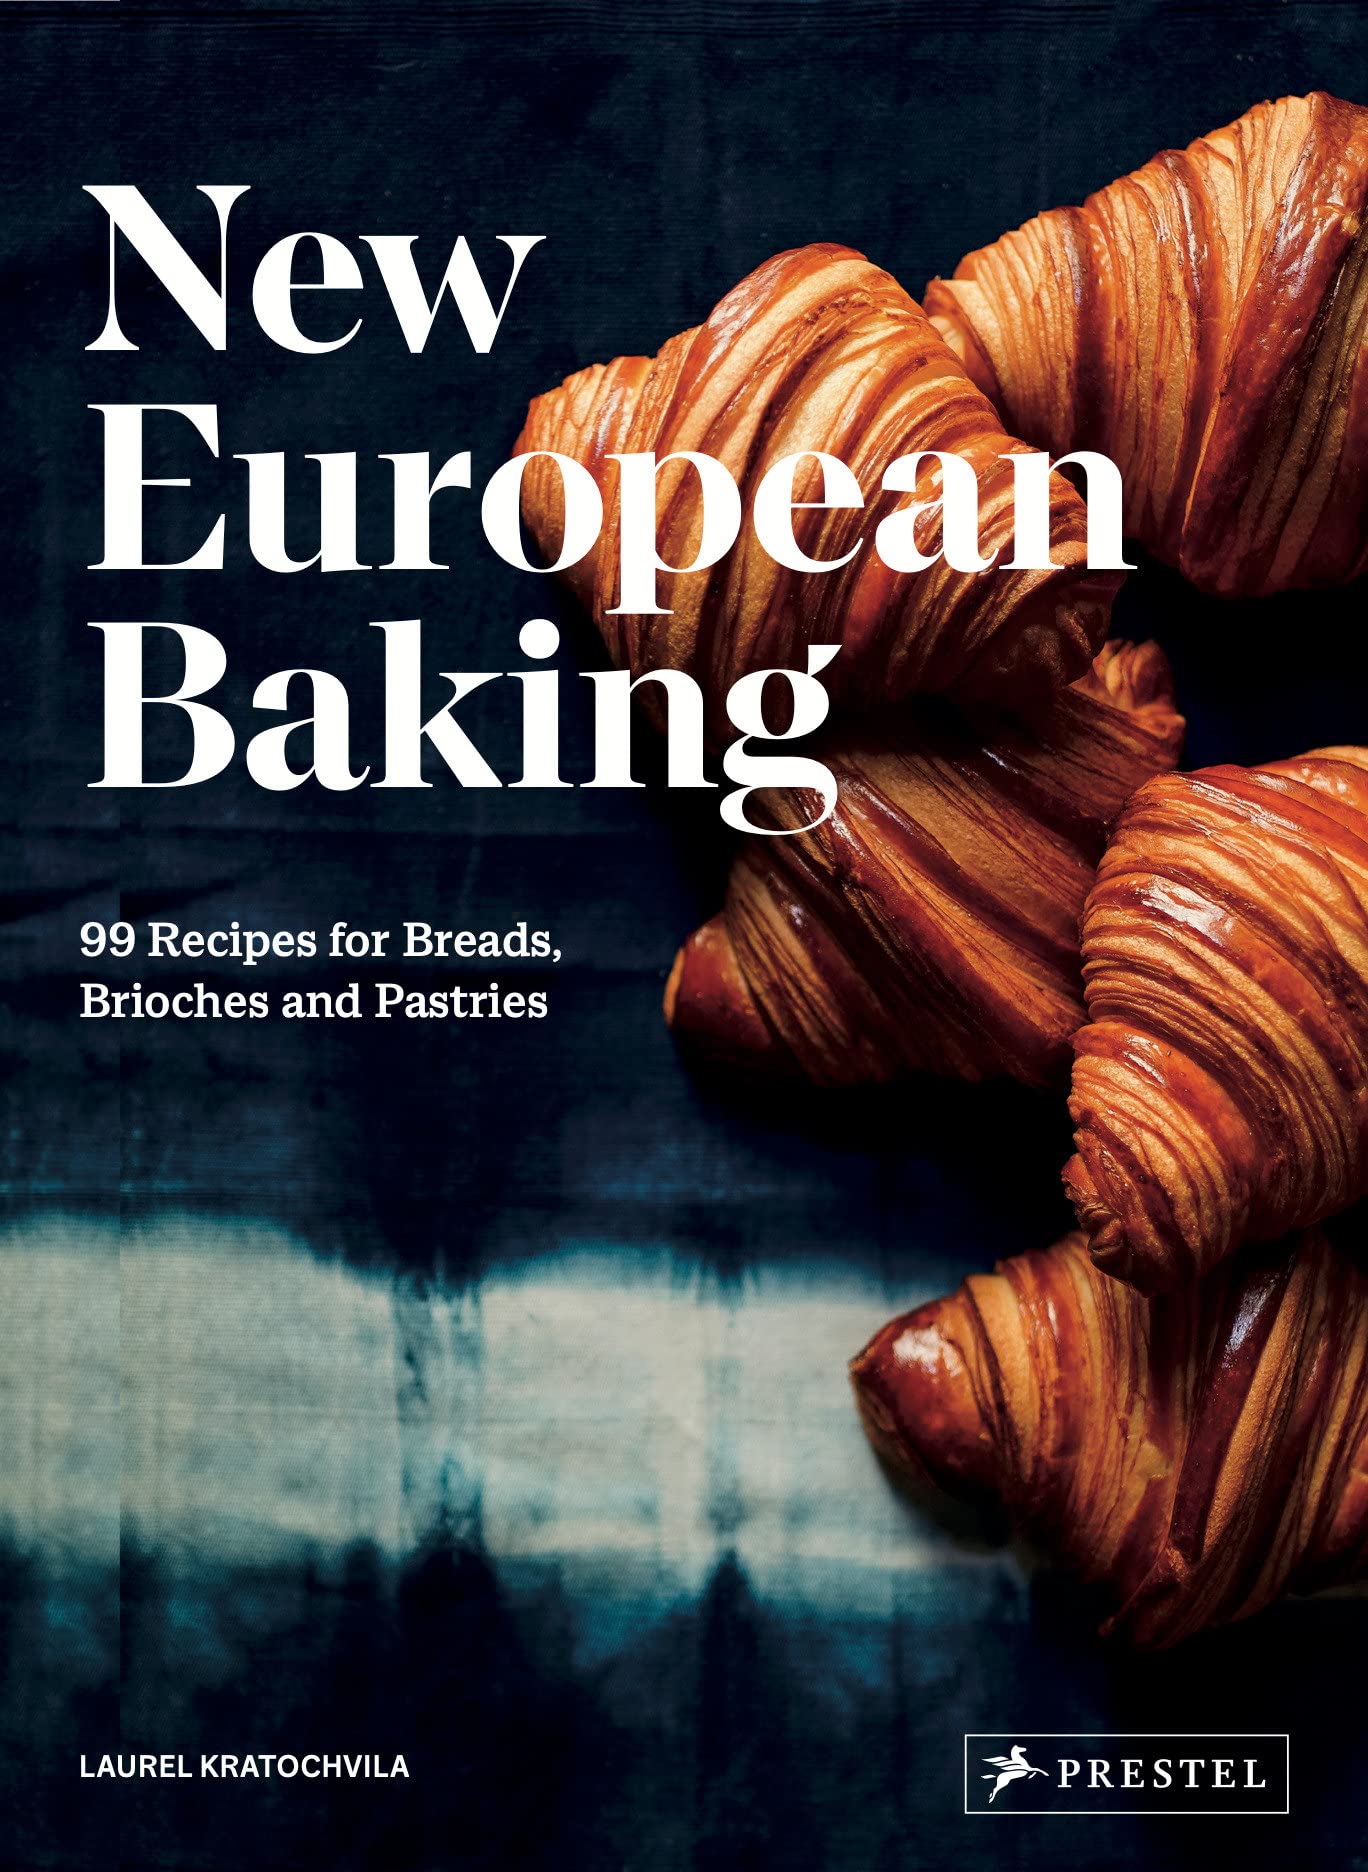 New European Baking: 99 Recipes for Breads, Brioches and Pastries (Laurel Kratochvila)